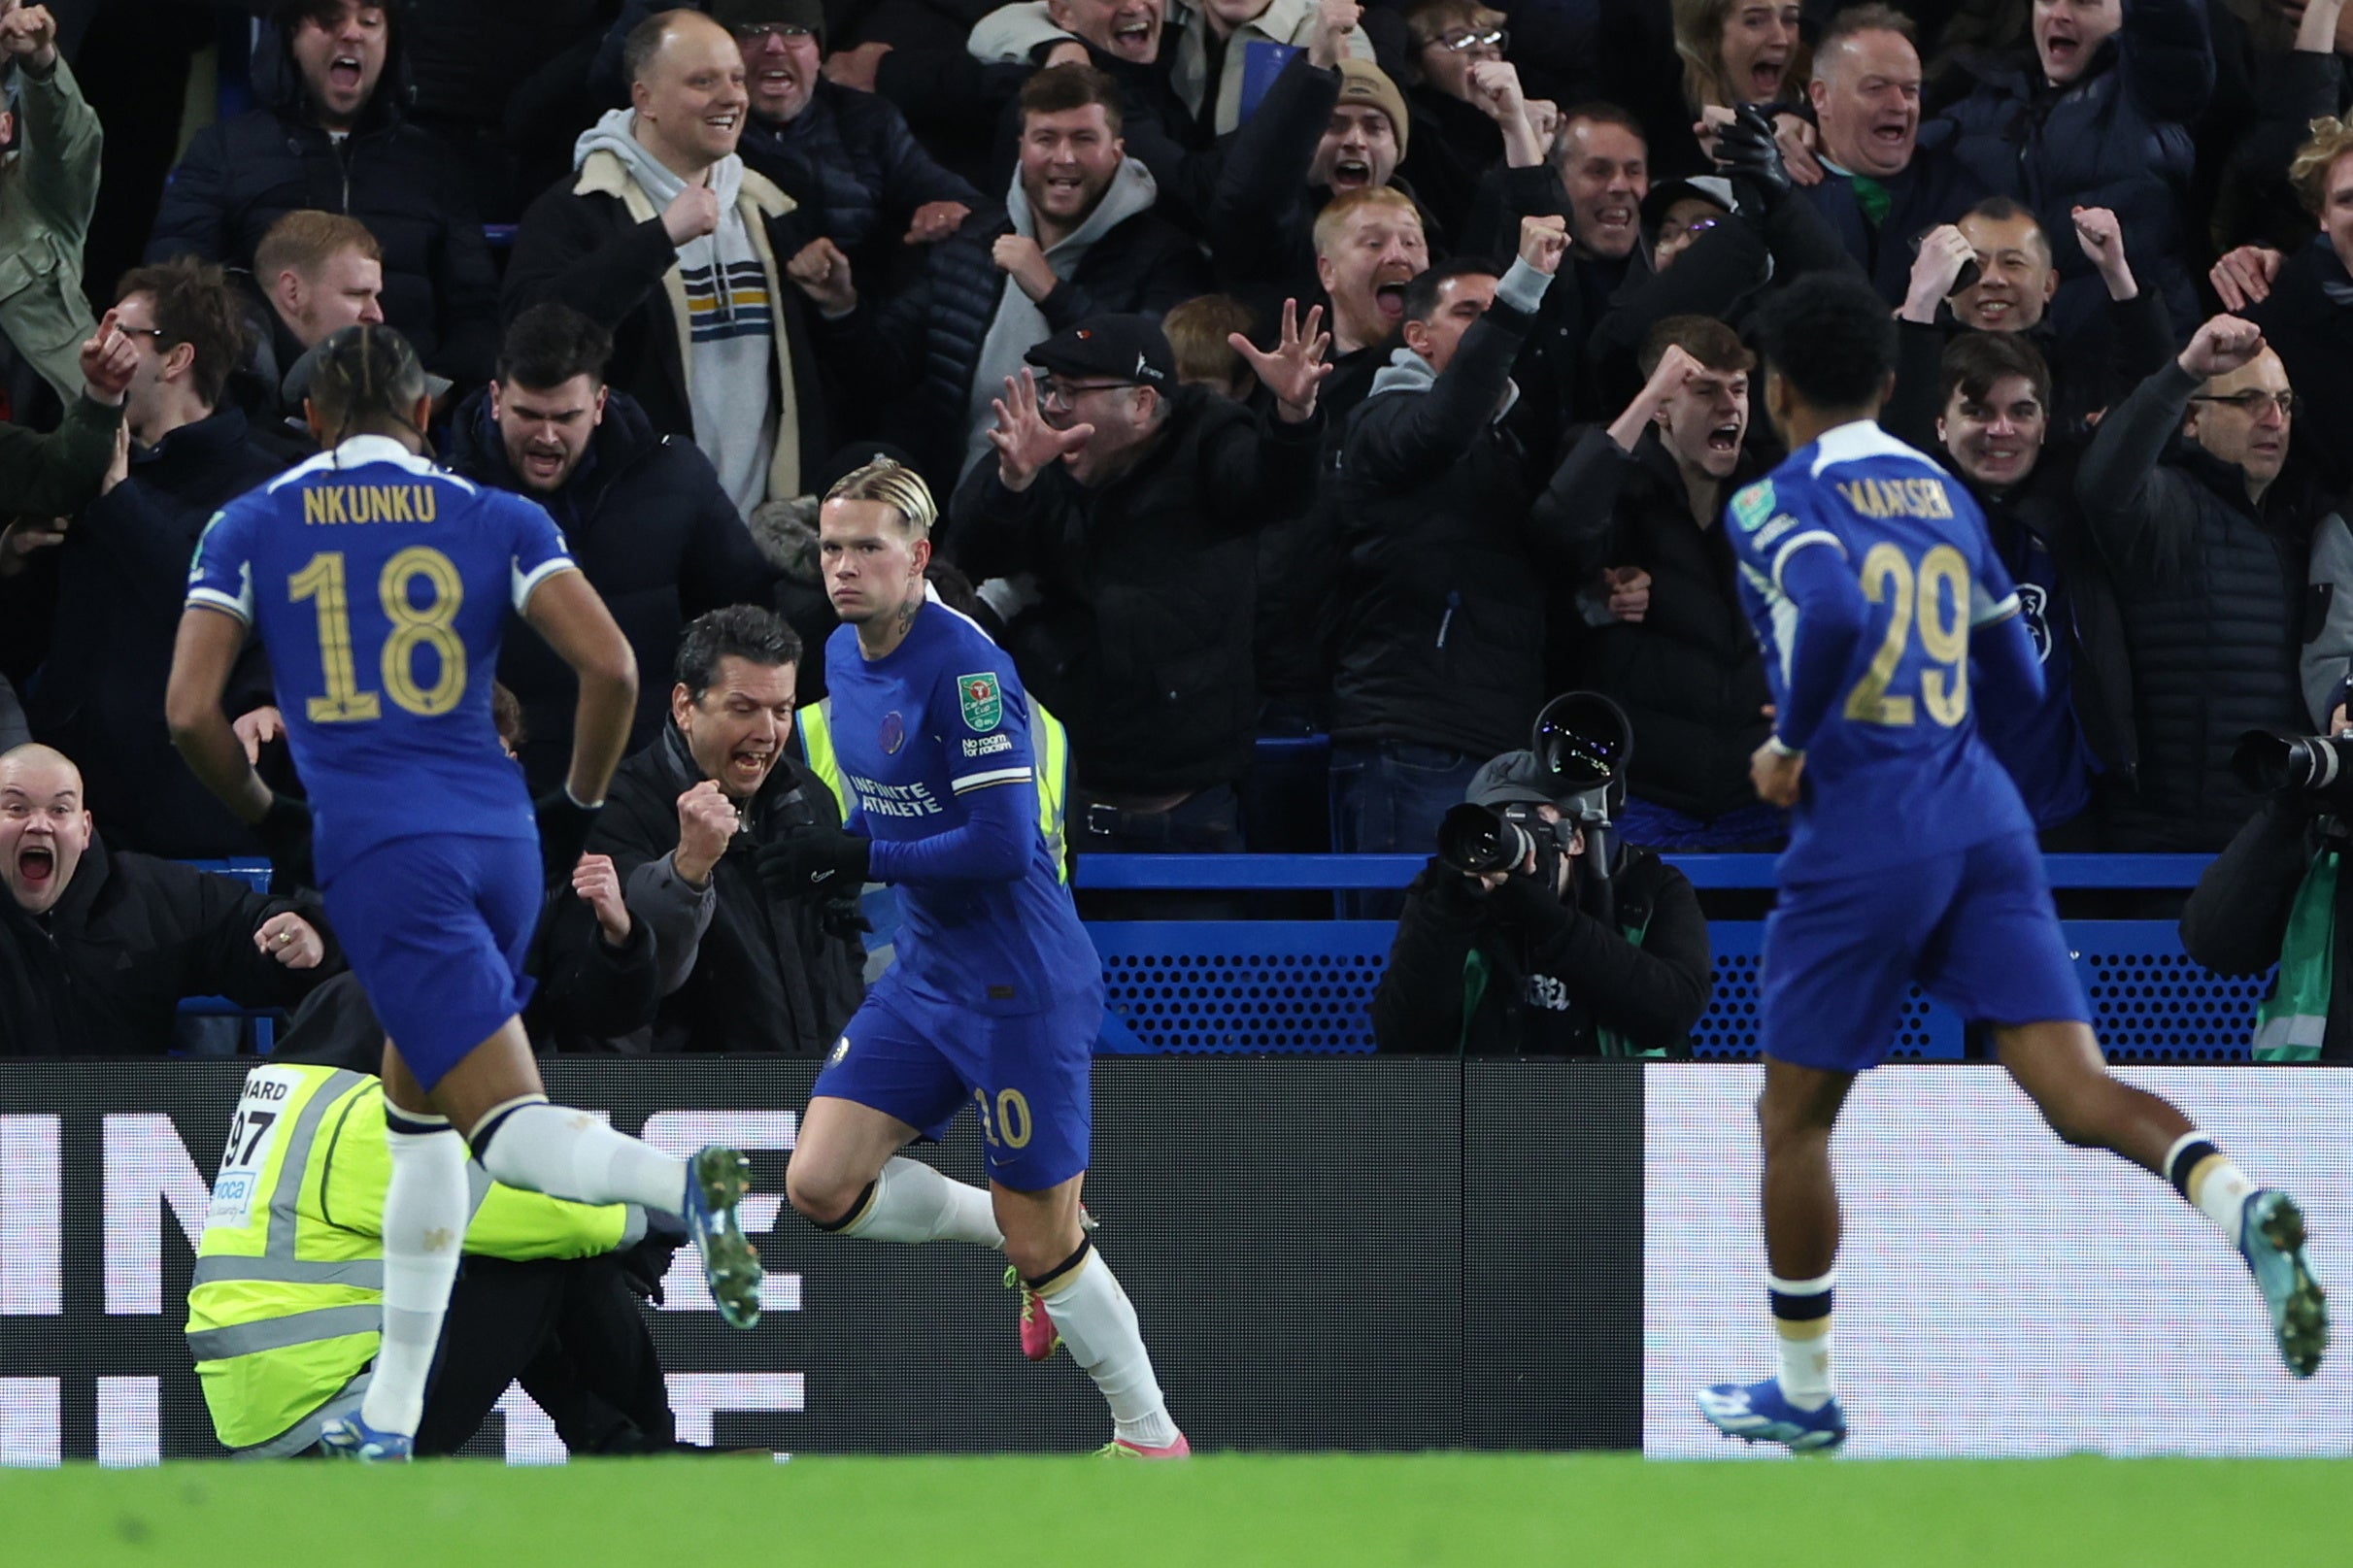 Chelsea could barely believe their luck at an injury-time equaliser